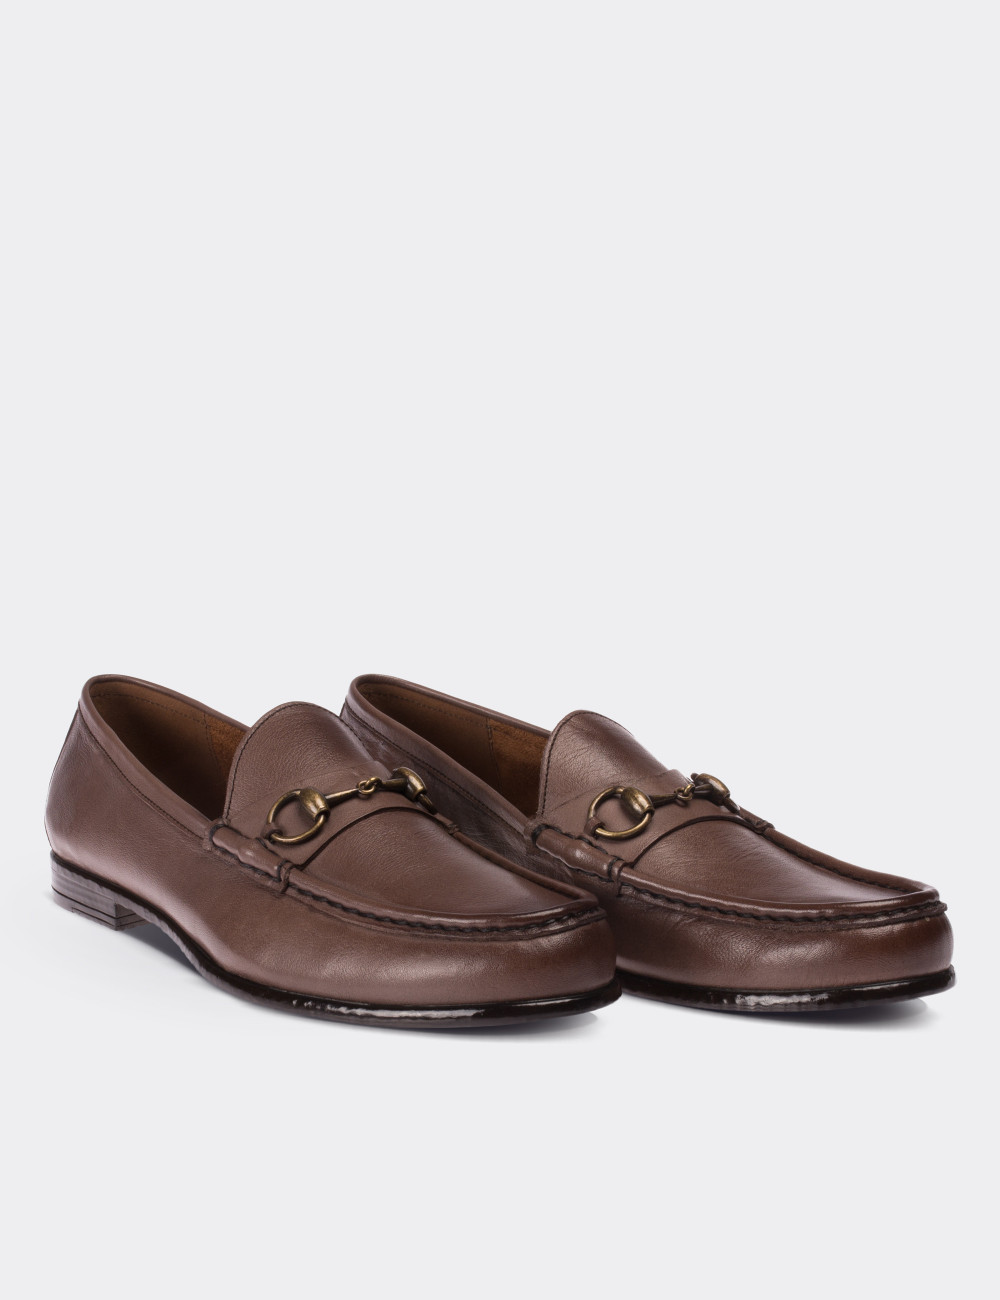 Sandstone  Leather Loafers - 01649MVZNC01